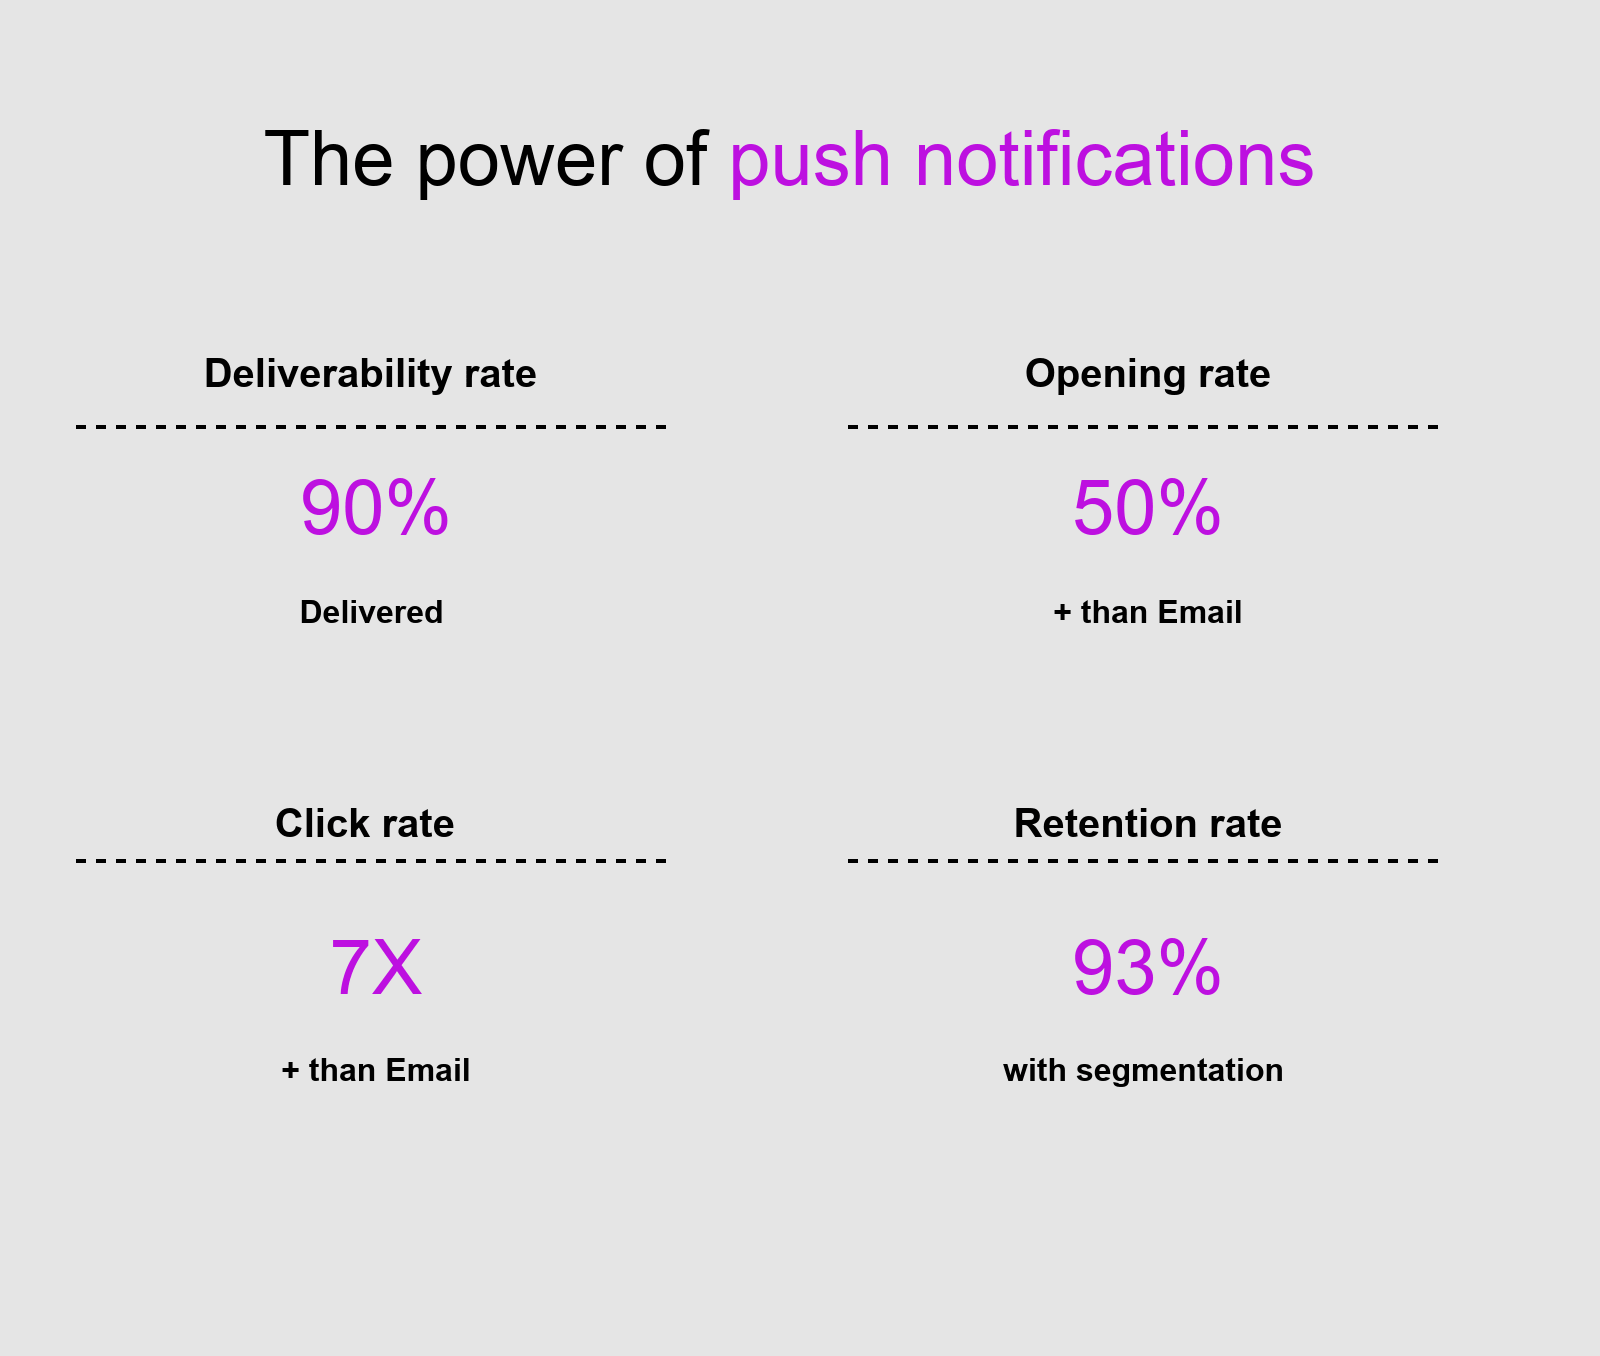 One of the chief advantages of push notifications is their customizability